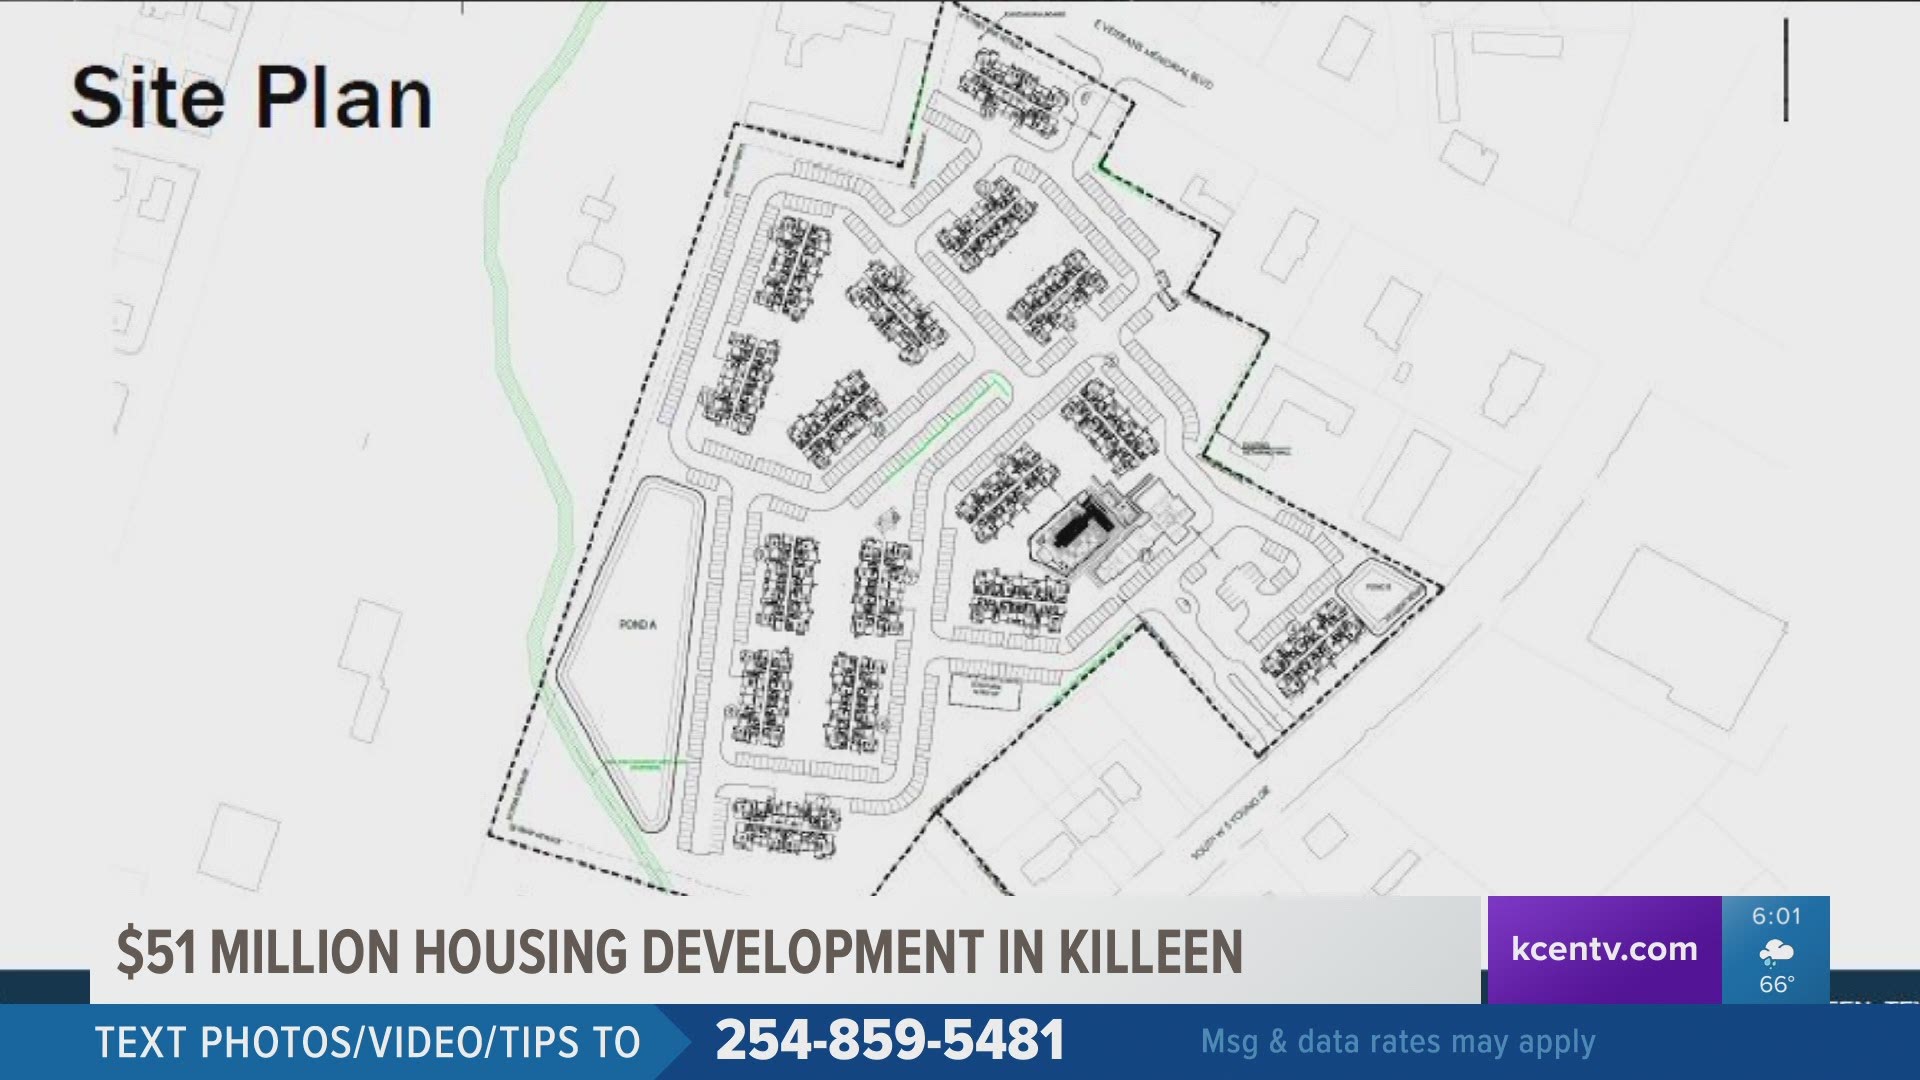 The Killeen City Council is expected to have a workshop concerning the project next month with a vote on it as early as Jan. 12.